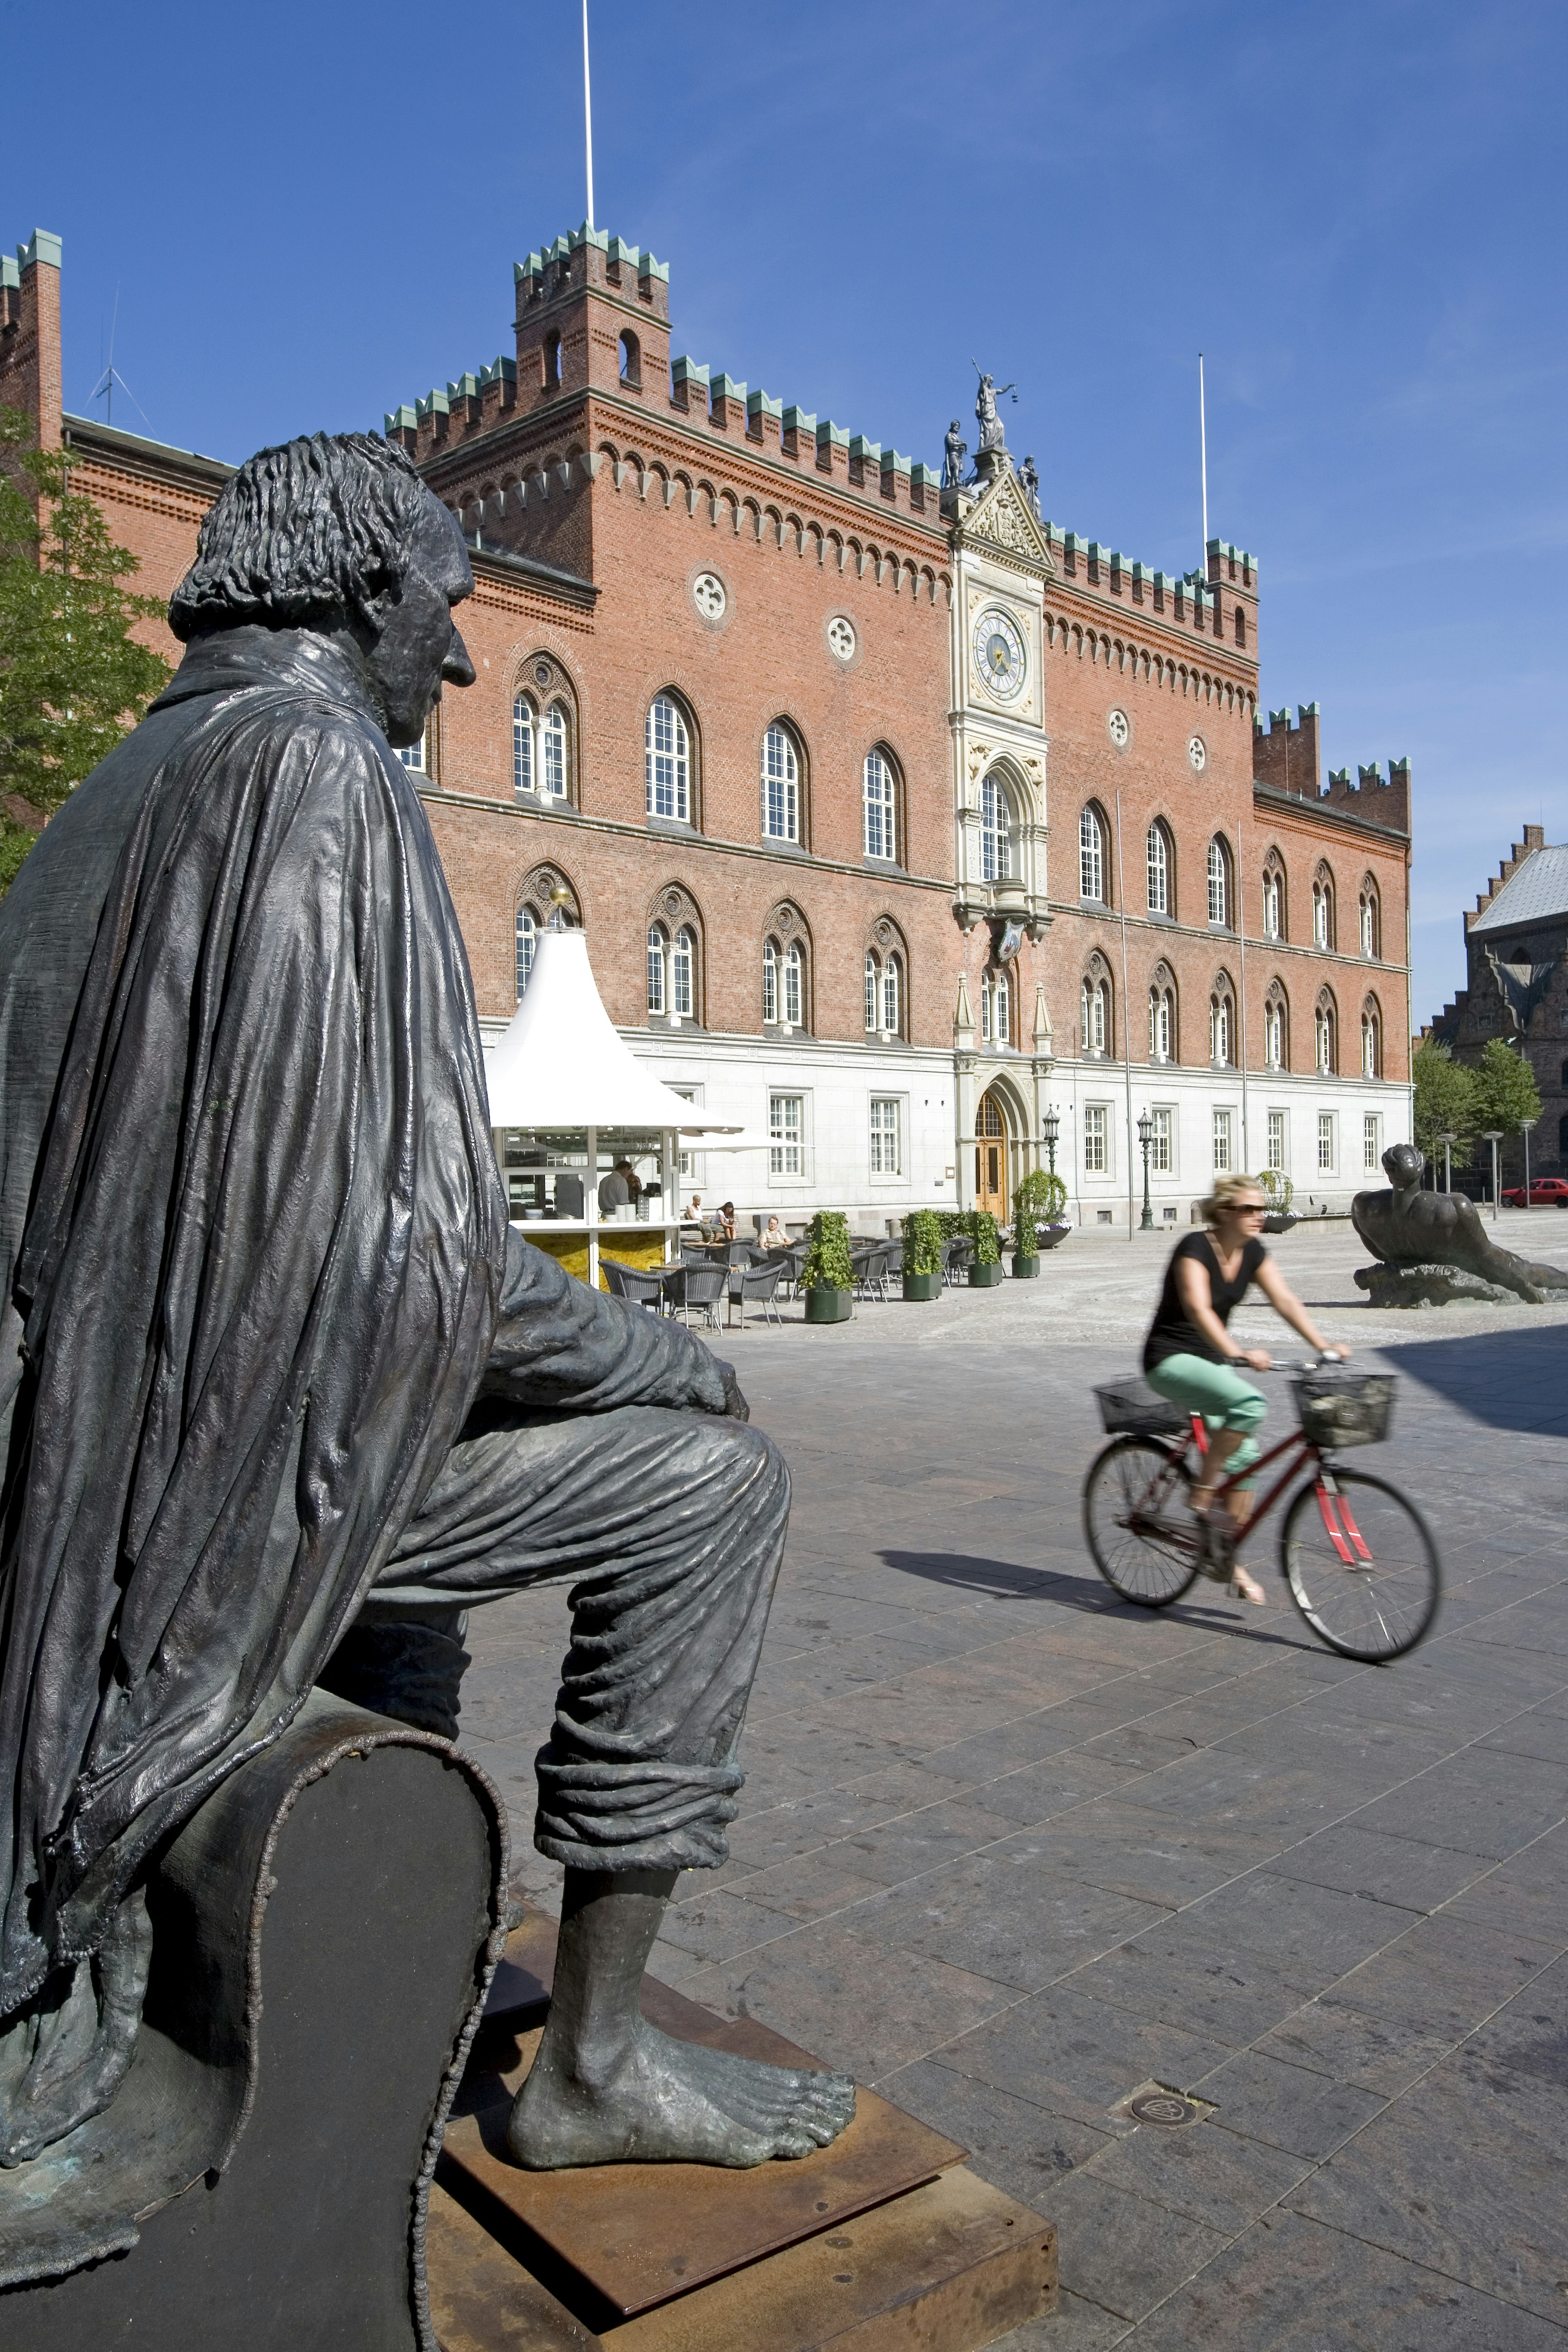 A seated statue of Hans Christian Andersen on a large public square in Odense, Denmark; a woman is cycling across the frame in front of the statue.